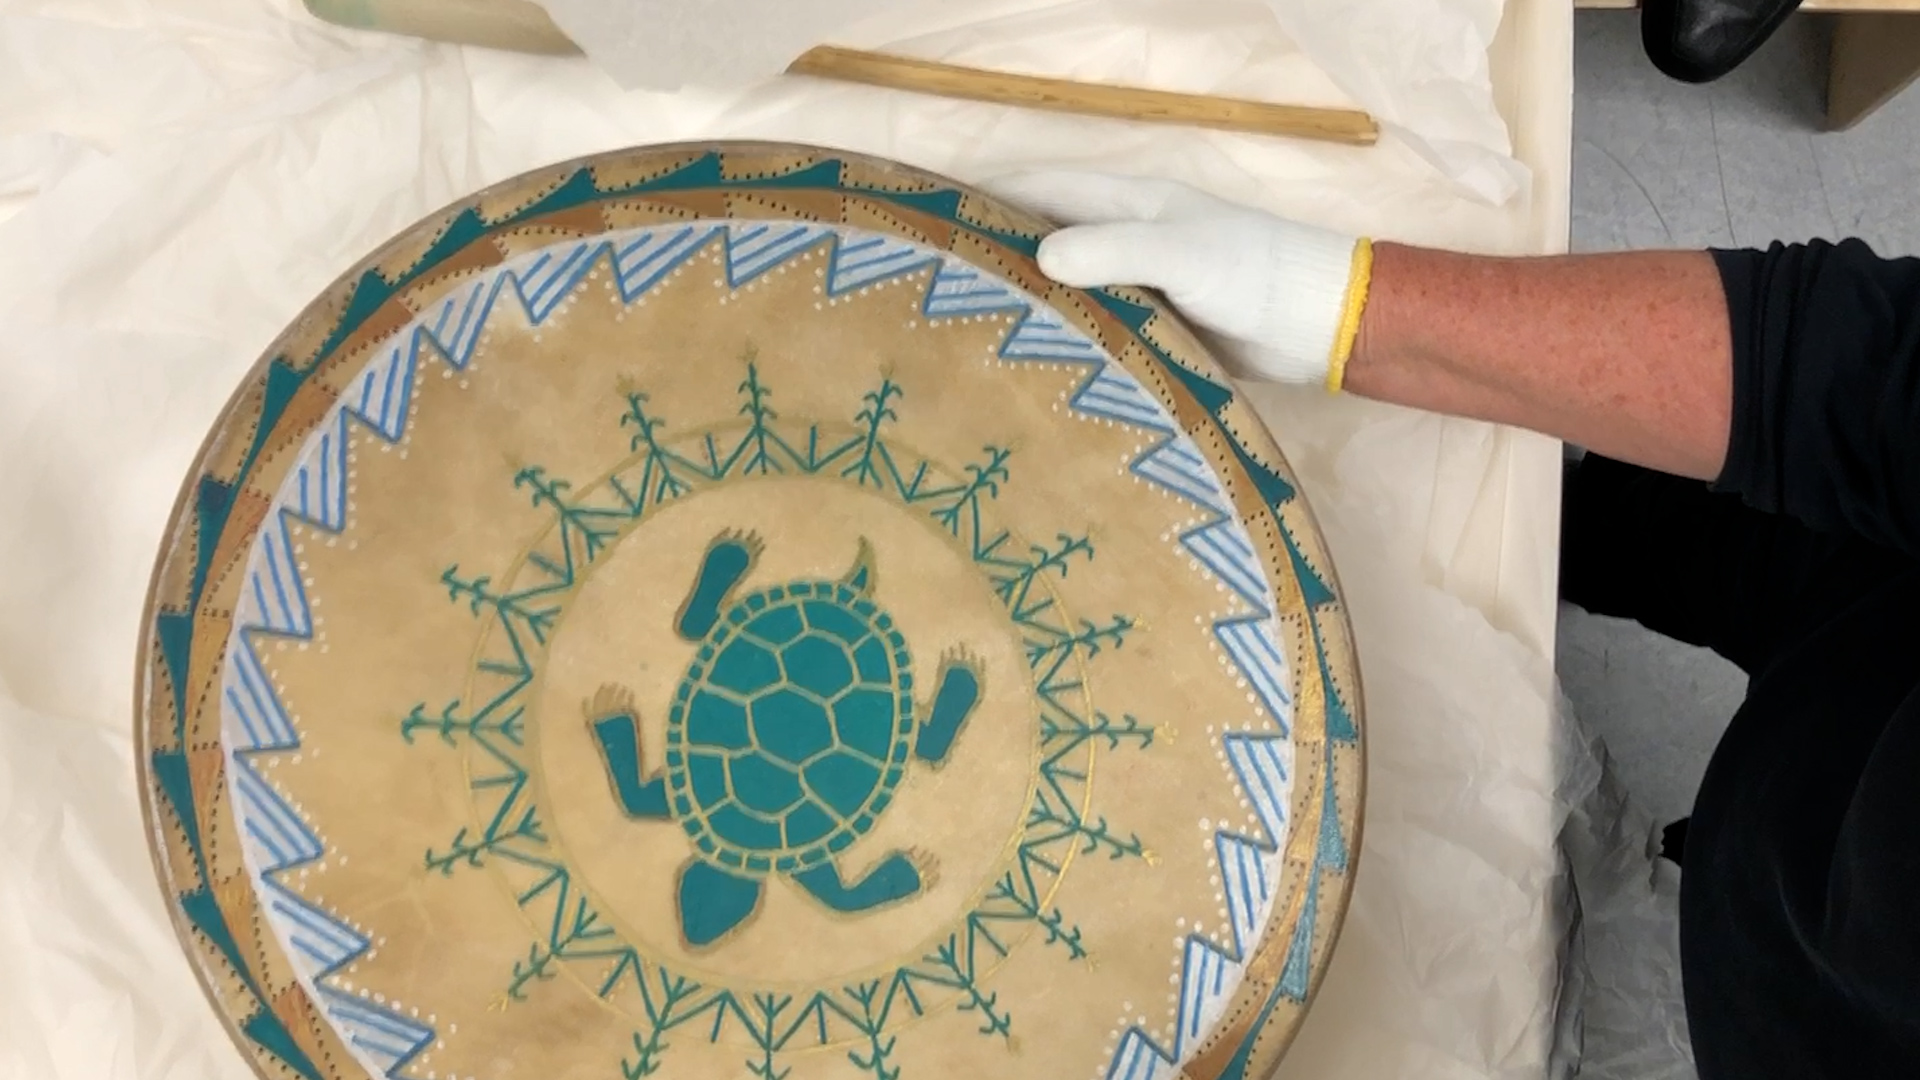 Behind the Scenes of the Indigenous Perspectives Exhibit